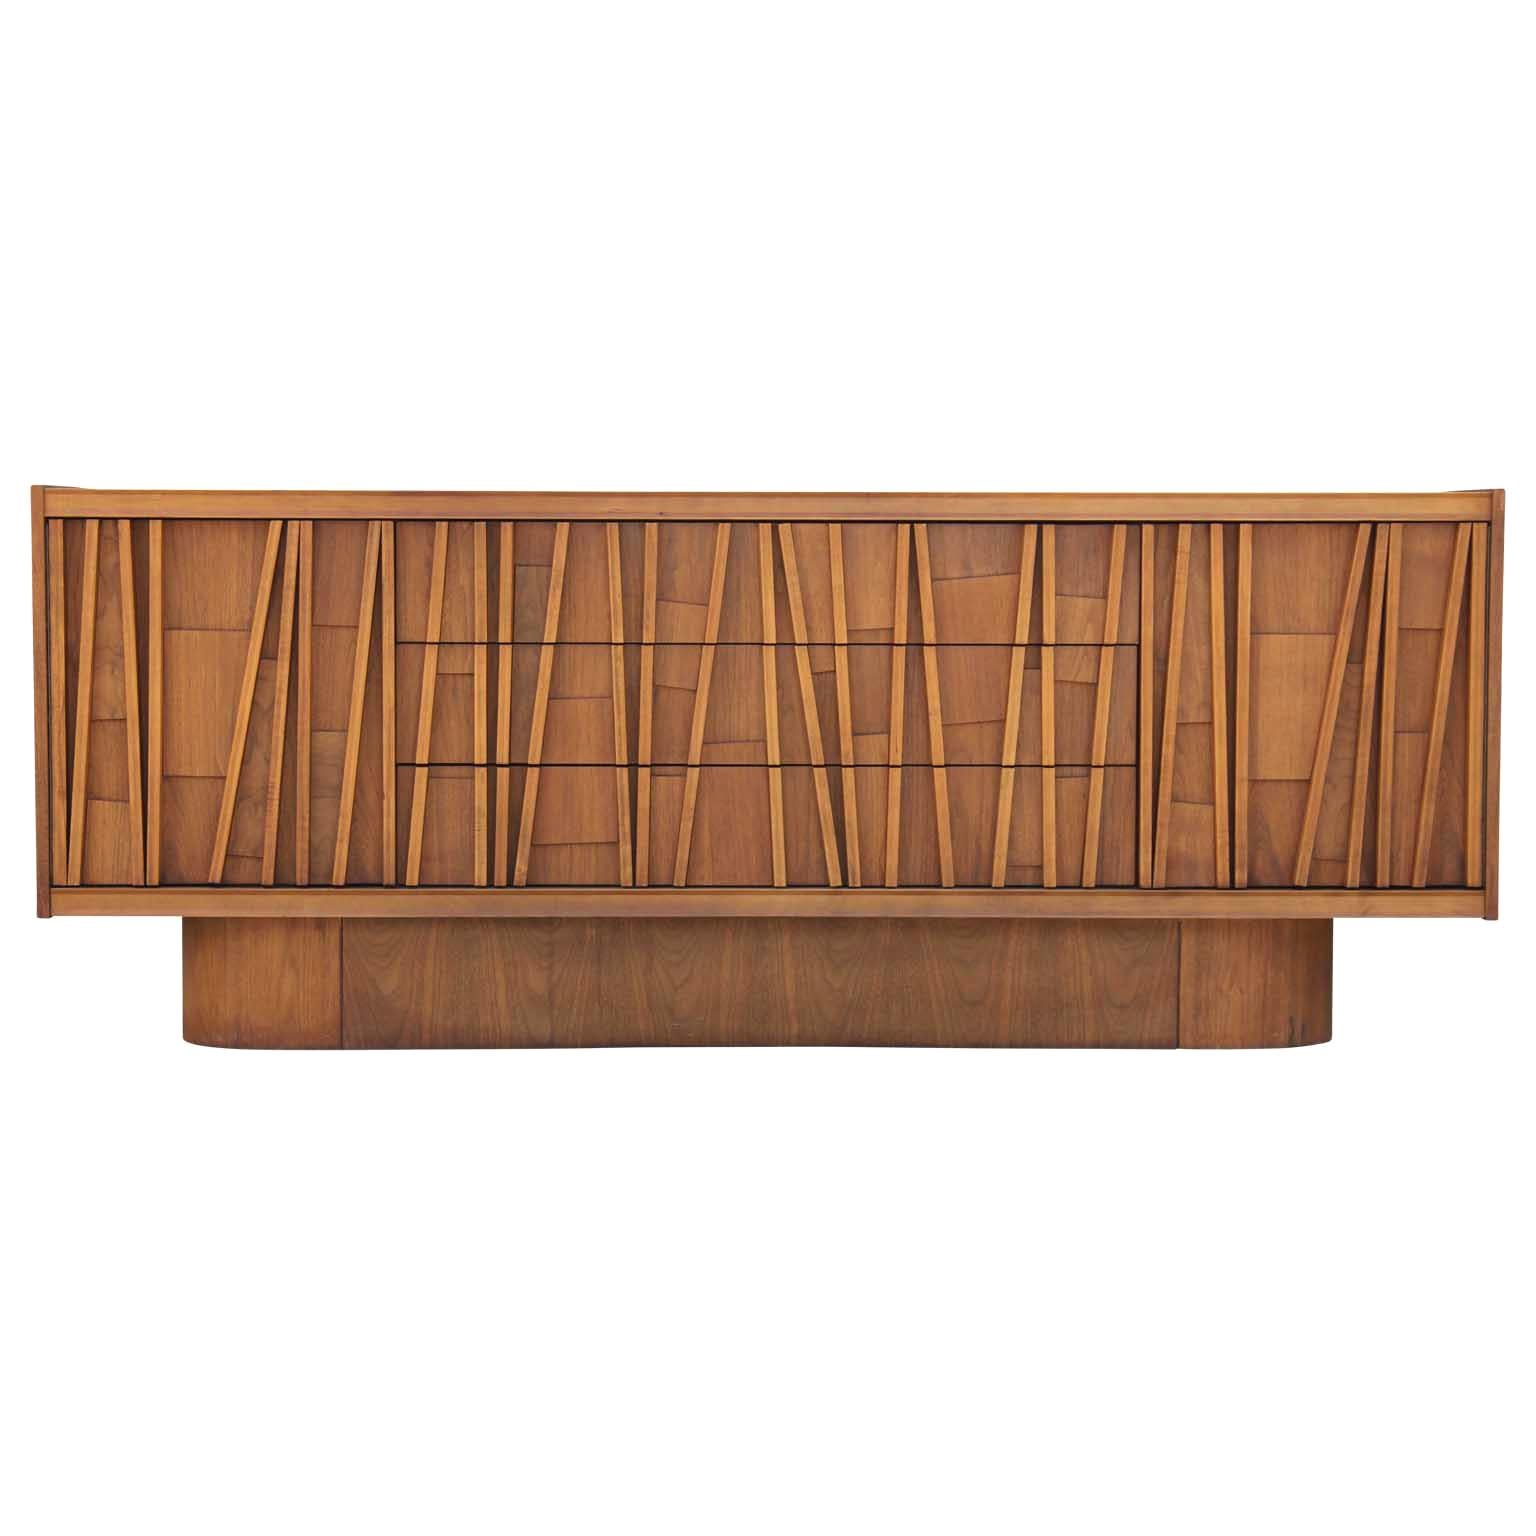 Canadian Brutalist Three-Drawer Credenza or Sideboard with Mosaic Details